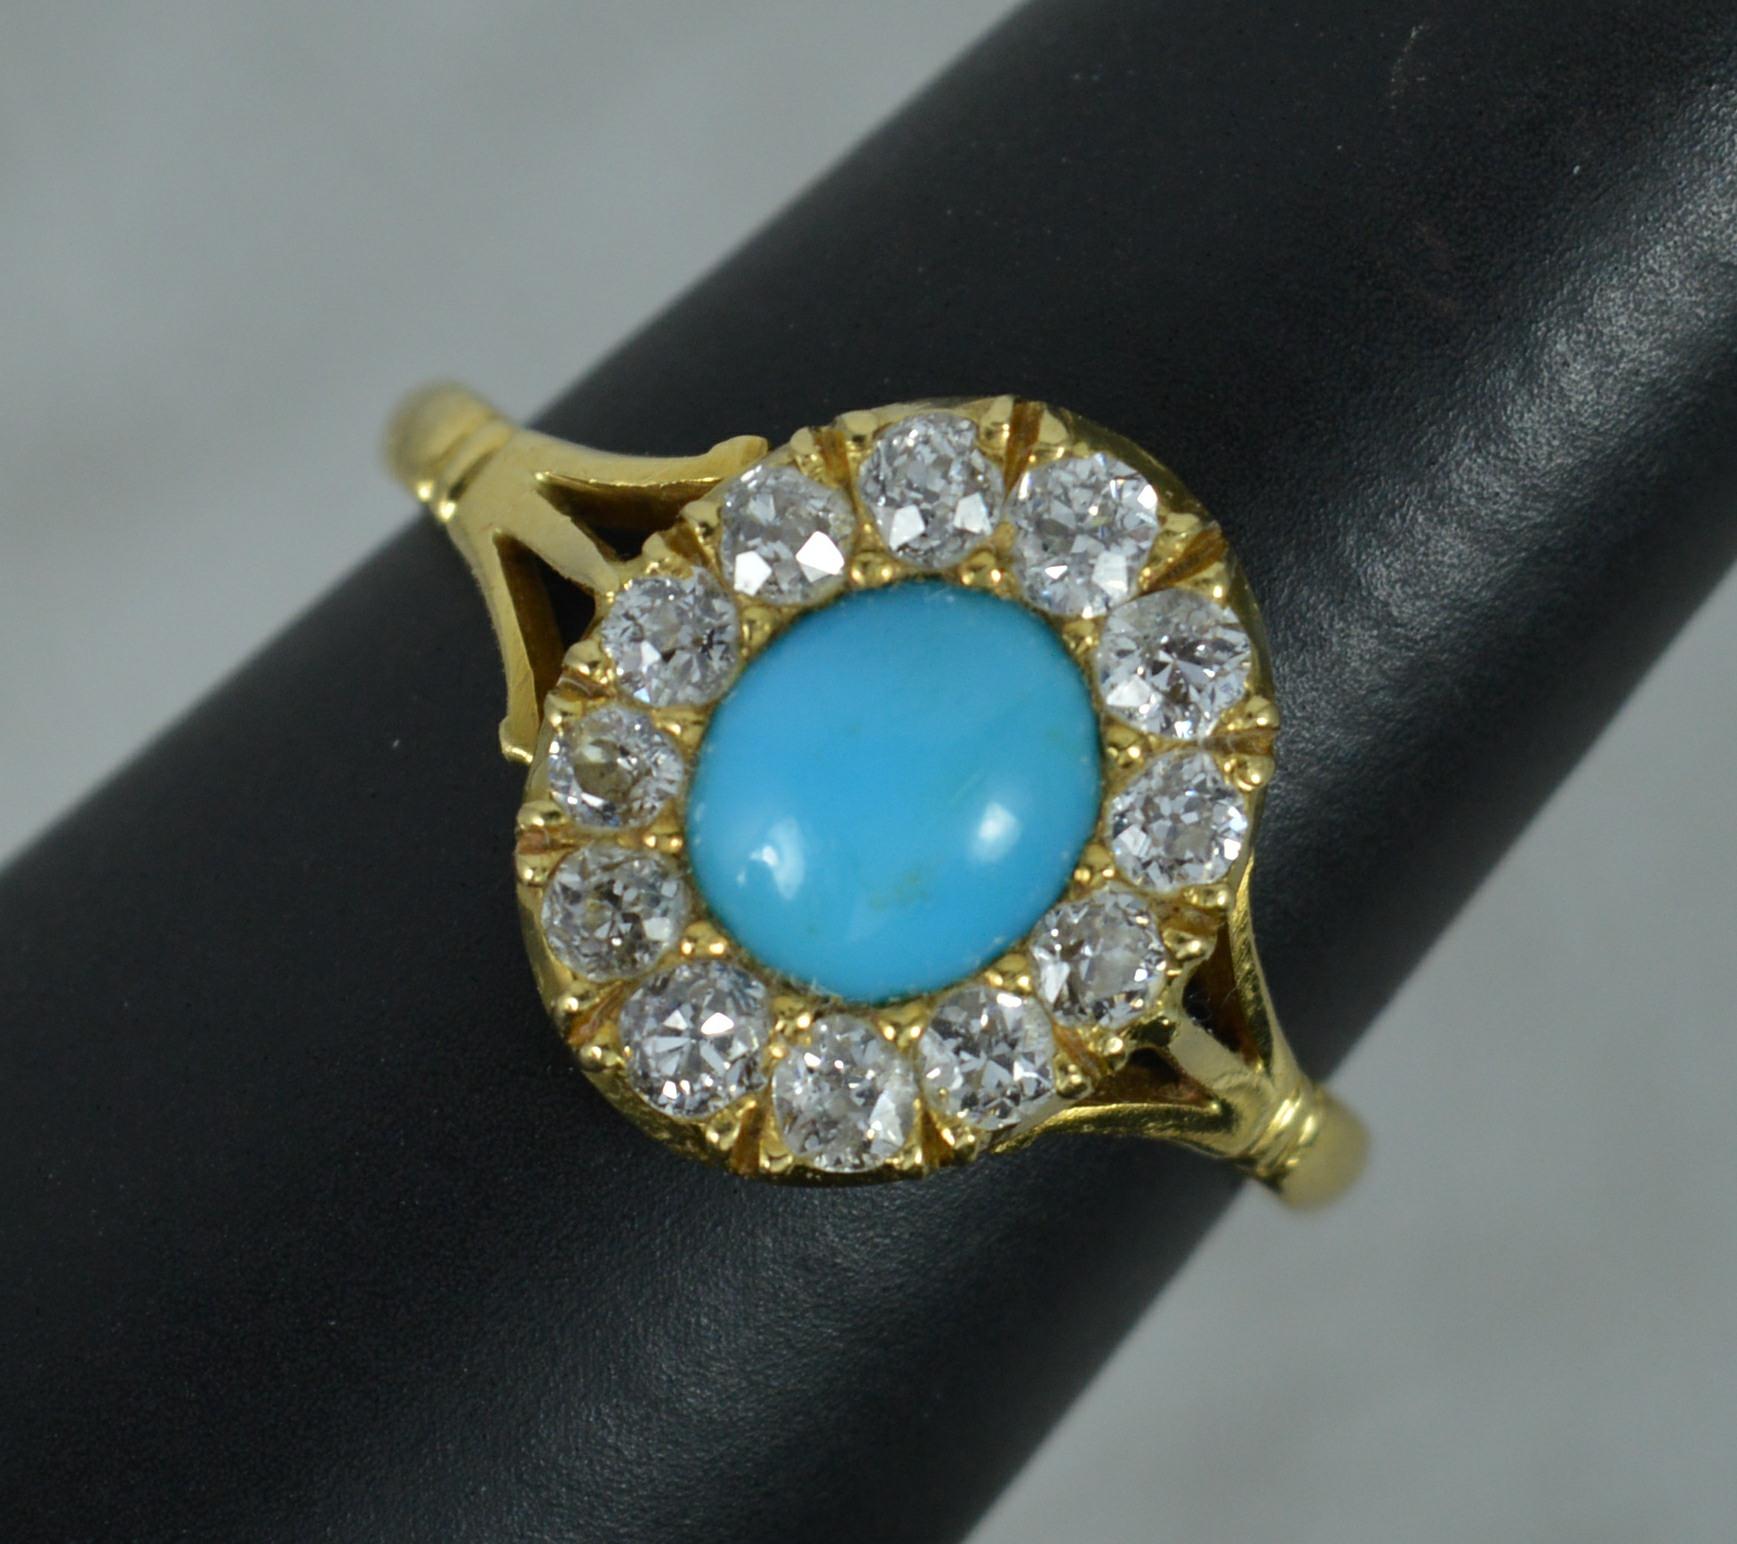 A stylish Victorian period cluster ring. c1880.
18 carat yellow gold example.
Designed an oval turquoise to the centre with twelve natural old European cut diamonds surrounding. Vs clarity, f-g colour. Very sparkly.
11mm x 13.5mm cluster head.